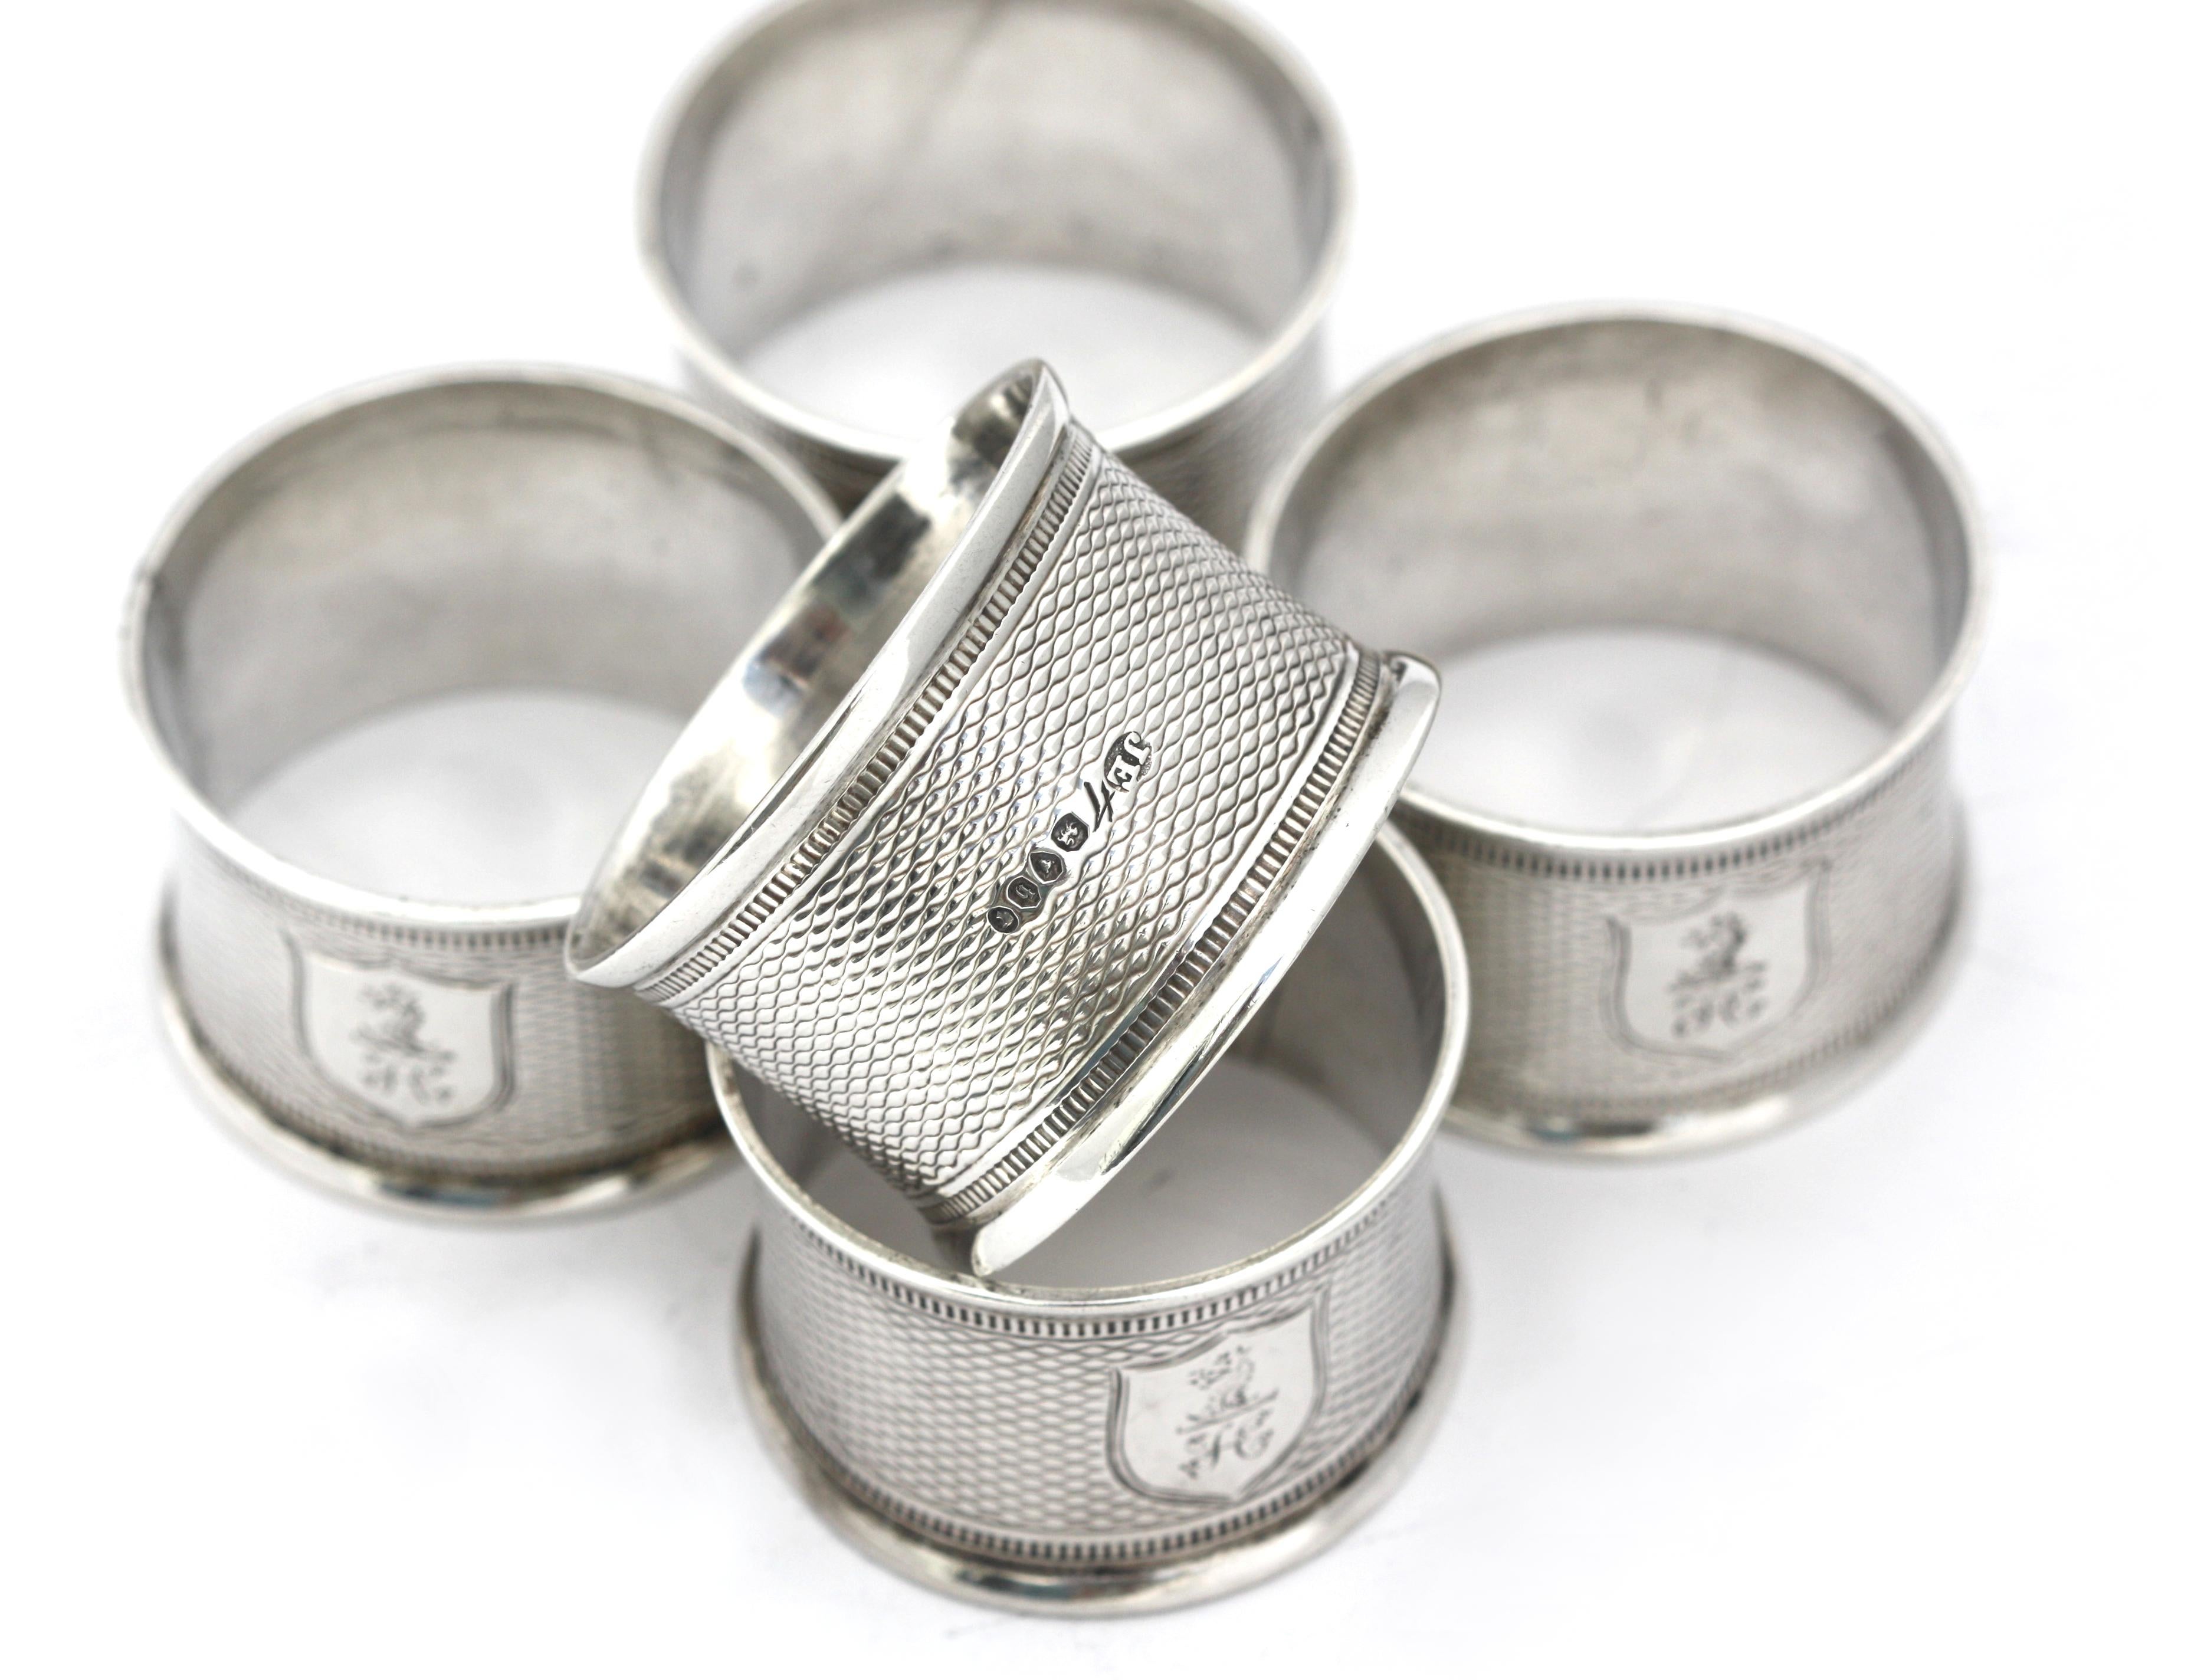 
Six Victorian Silver Napkin Rings
London, 1863, Maker John Evans II. Circular, with a stippled ground etched with an armorial shield centering a dragon head over the initials FC (?). 
Diameter 1.75 in. 3.55 troy oz. (only five photographed)